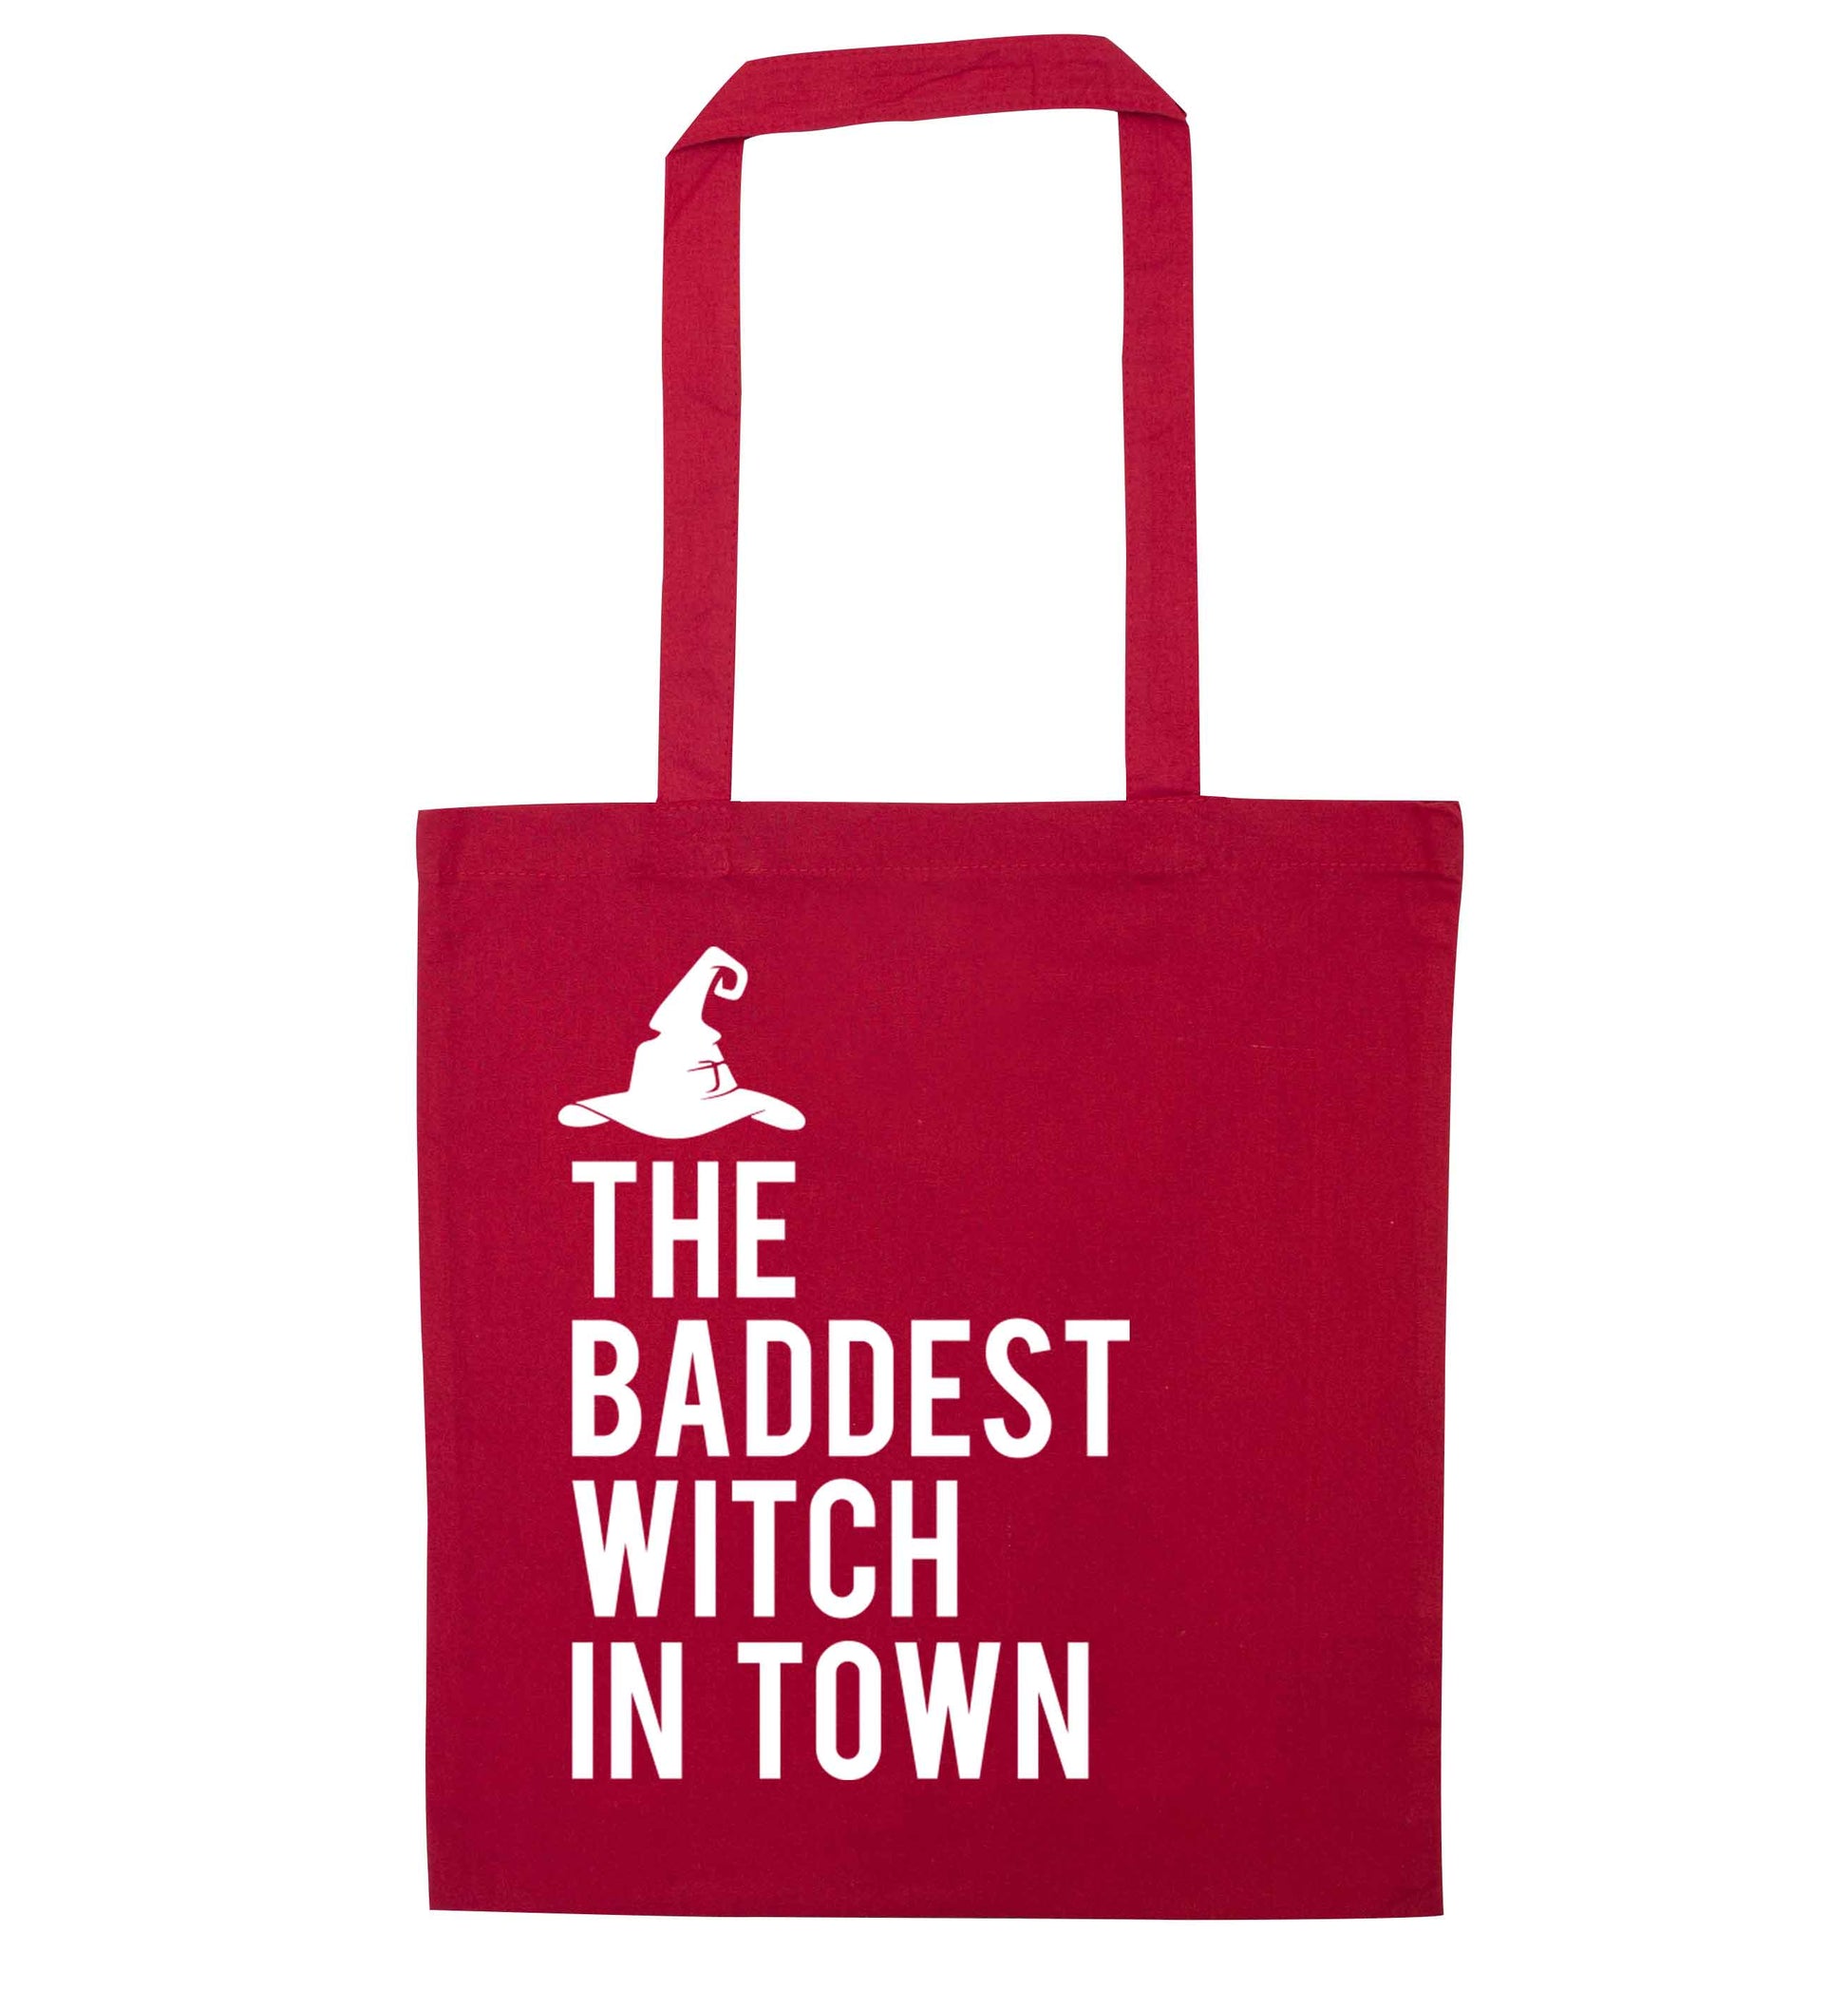 Badest witch in town red tote bag